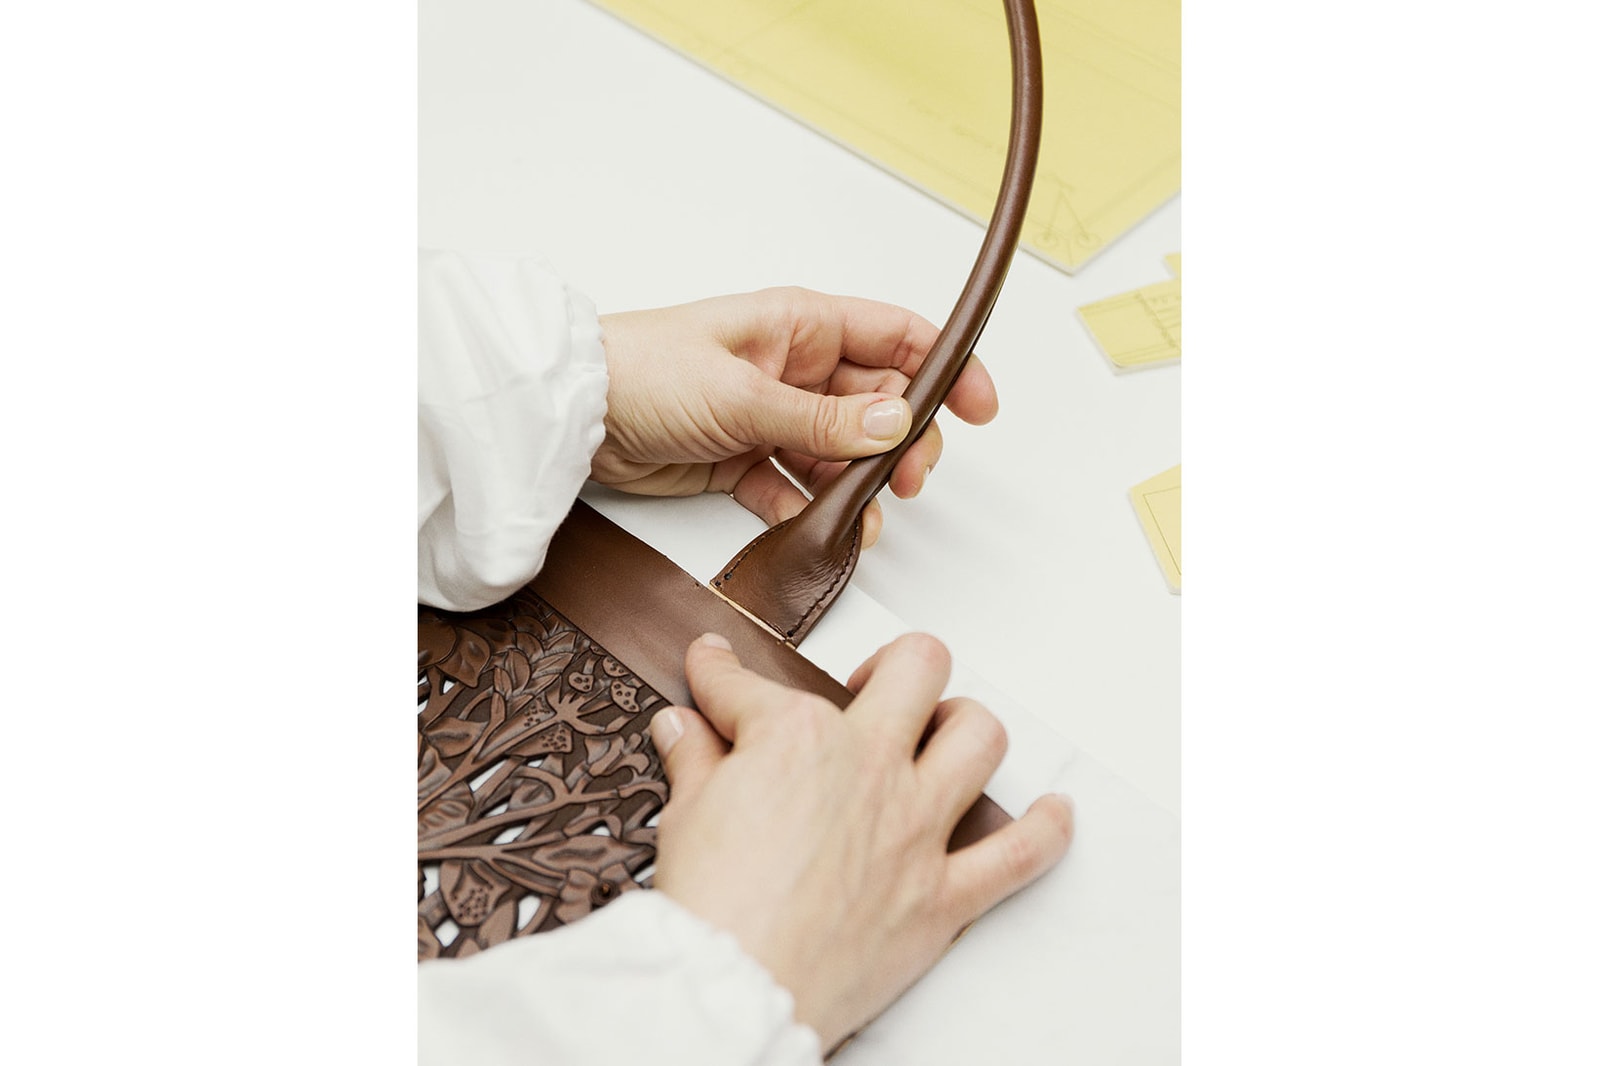 dior book tote handbag sculpted leather tooling how it's made bts savoir faire craftsmanship